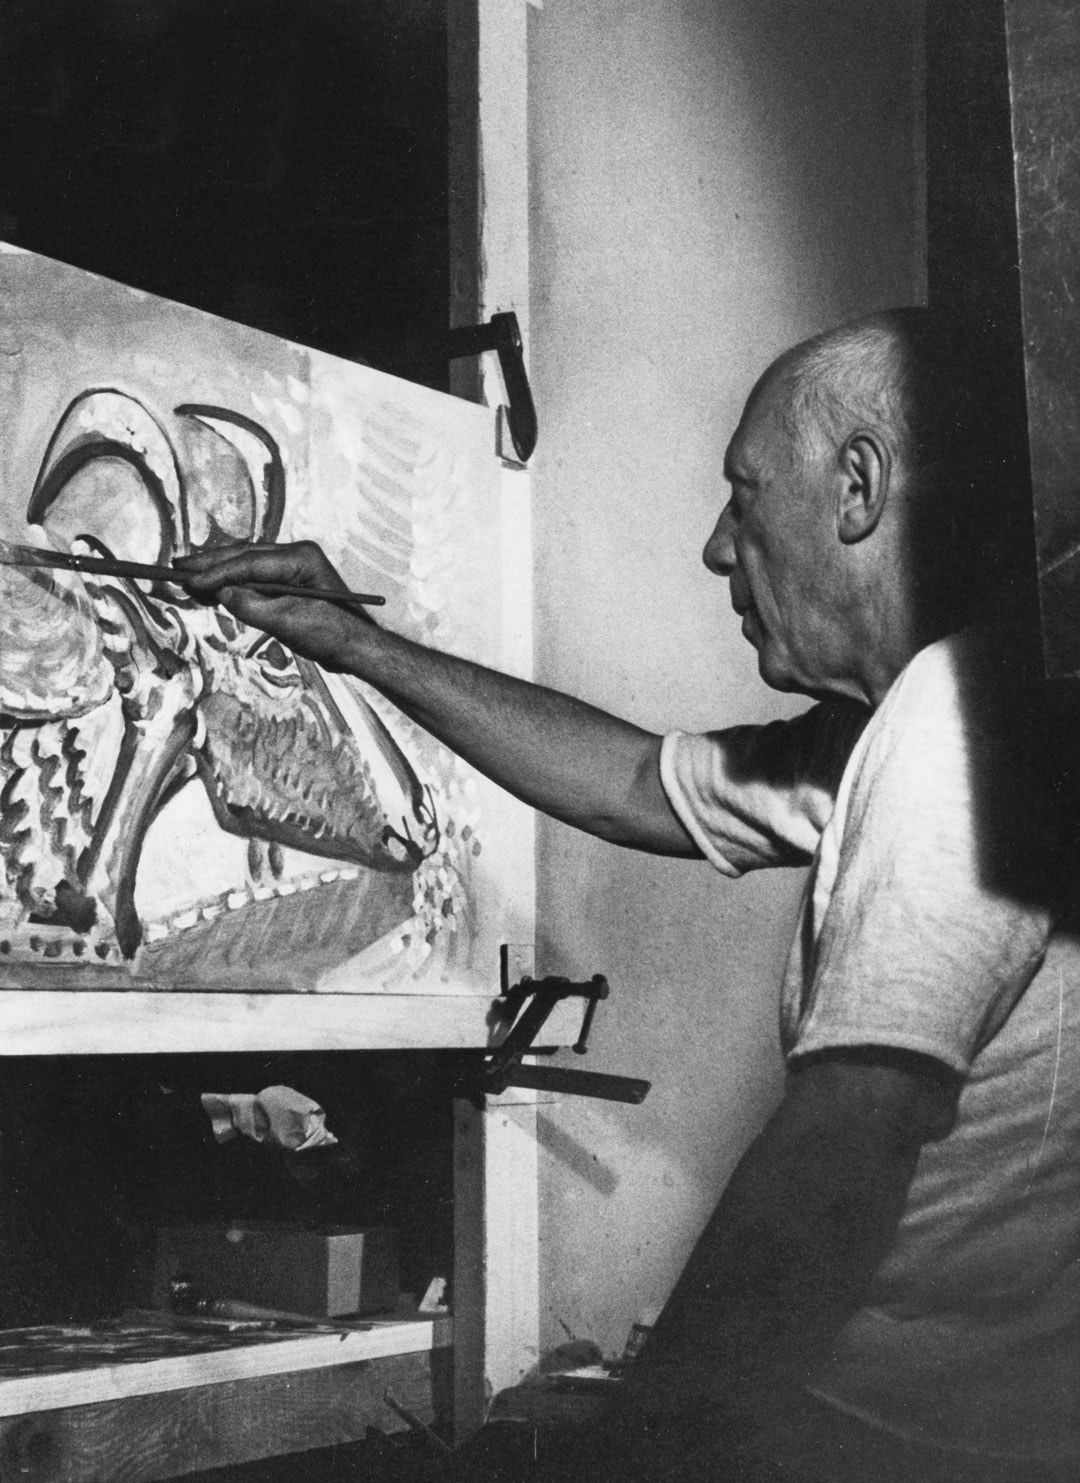 A still from the film Le mystère Picasso, 1956. The paintings that Picasso made on camera were destroyed after filming.